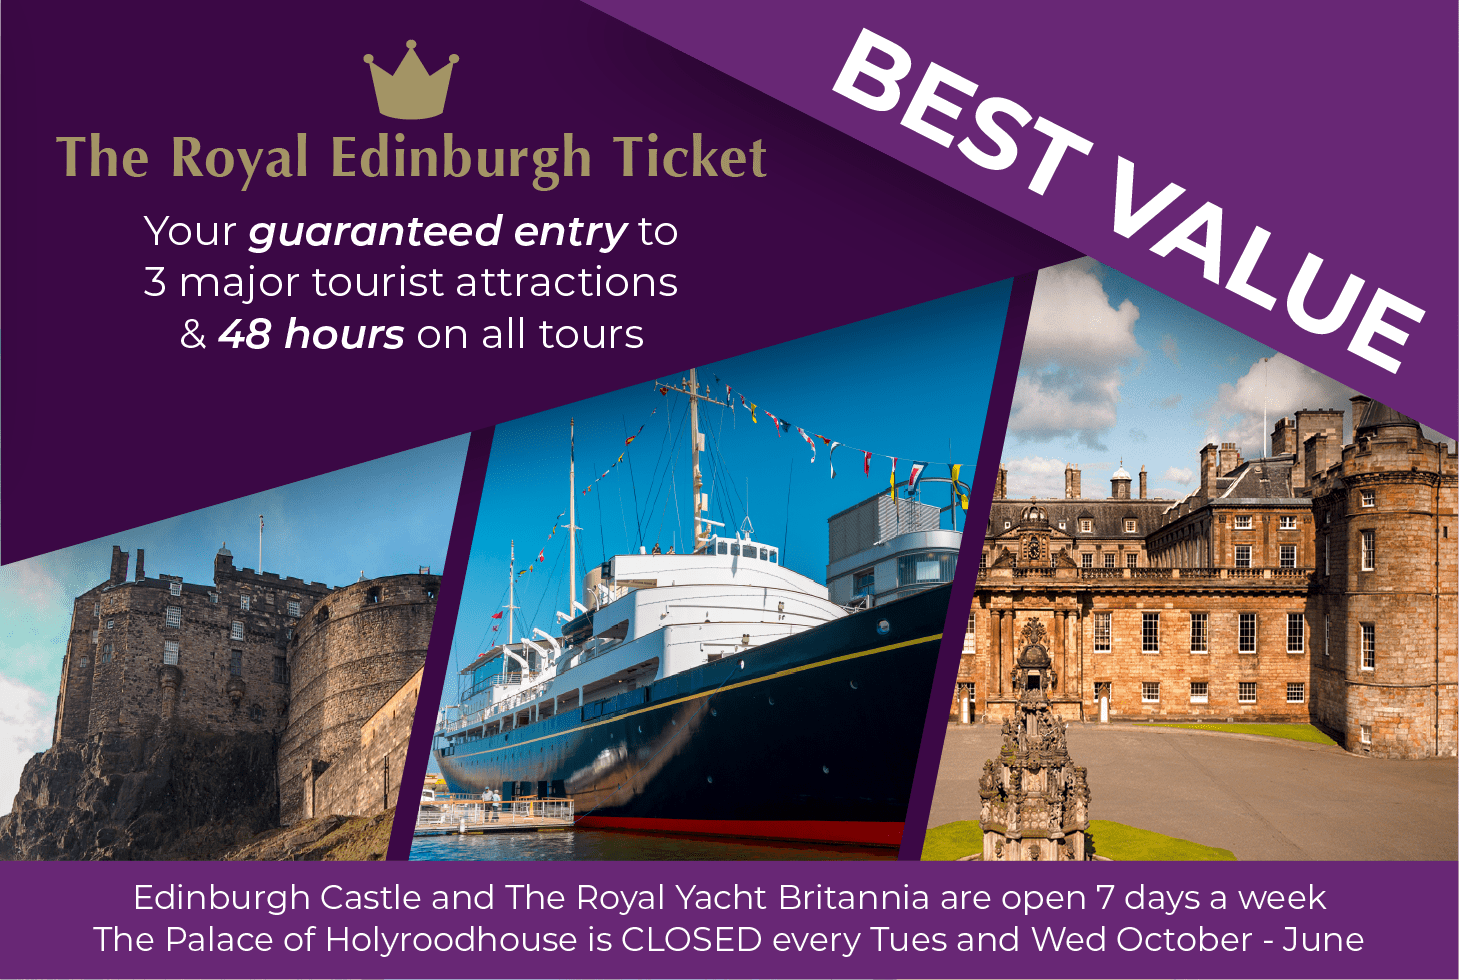 Upgrade to the Royal Edinburgh Ticket. Your guaranteed entry to 3 major tourist attractions & 48 hours on all tours. Attractions include Edinburgh Castle, The Royal Yacht Britannia and the Palace of Holyroodhouse. Edinburgh Castle and The Royal Yacht Britannia are open 7 days a week. The Palace of Holyroodhouse is closed every Tuesday and Wednesday between October and June.